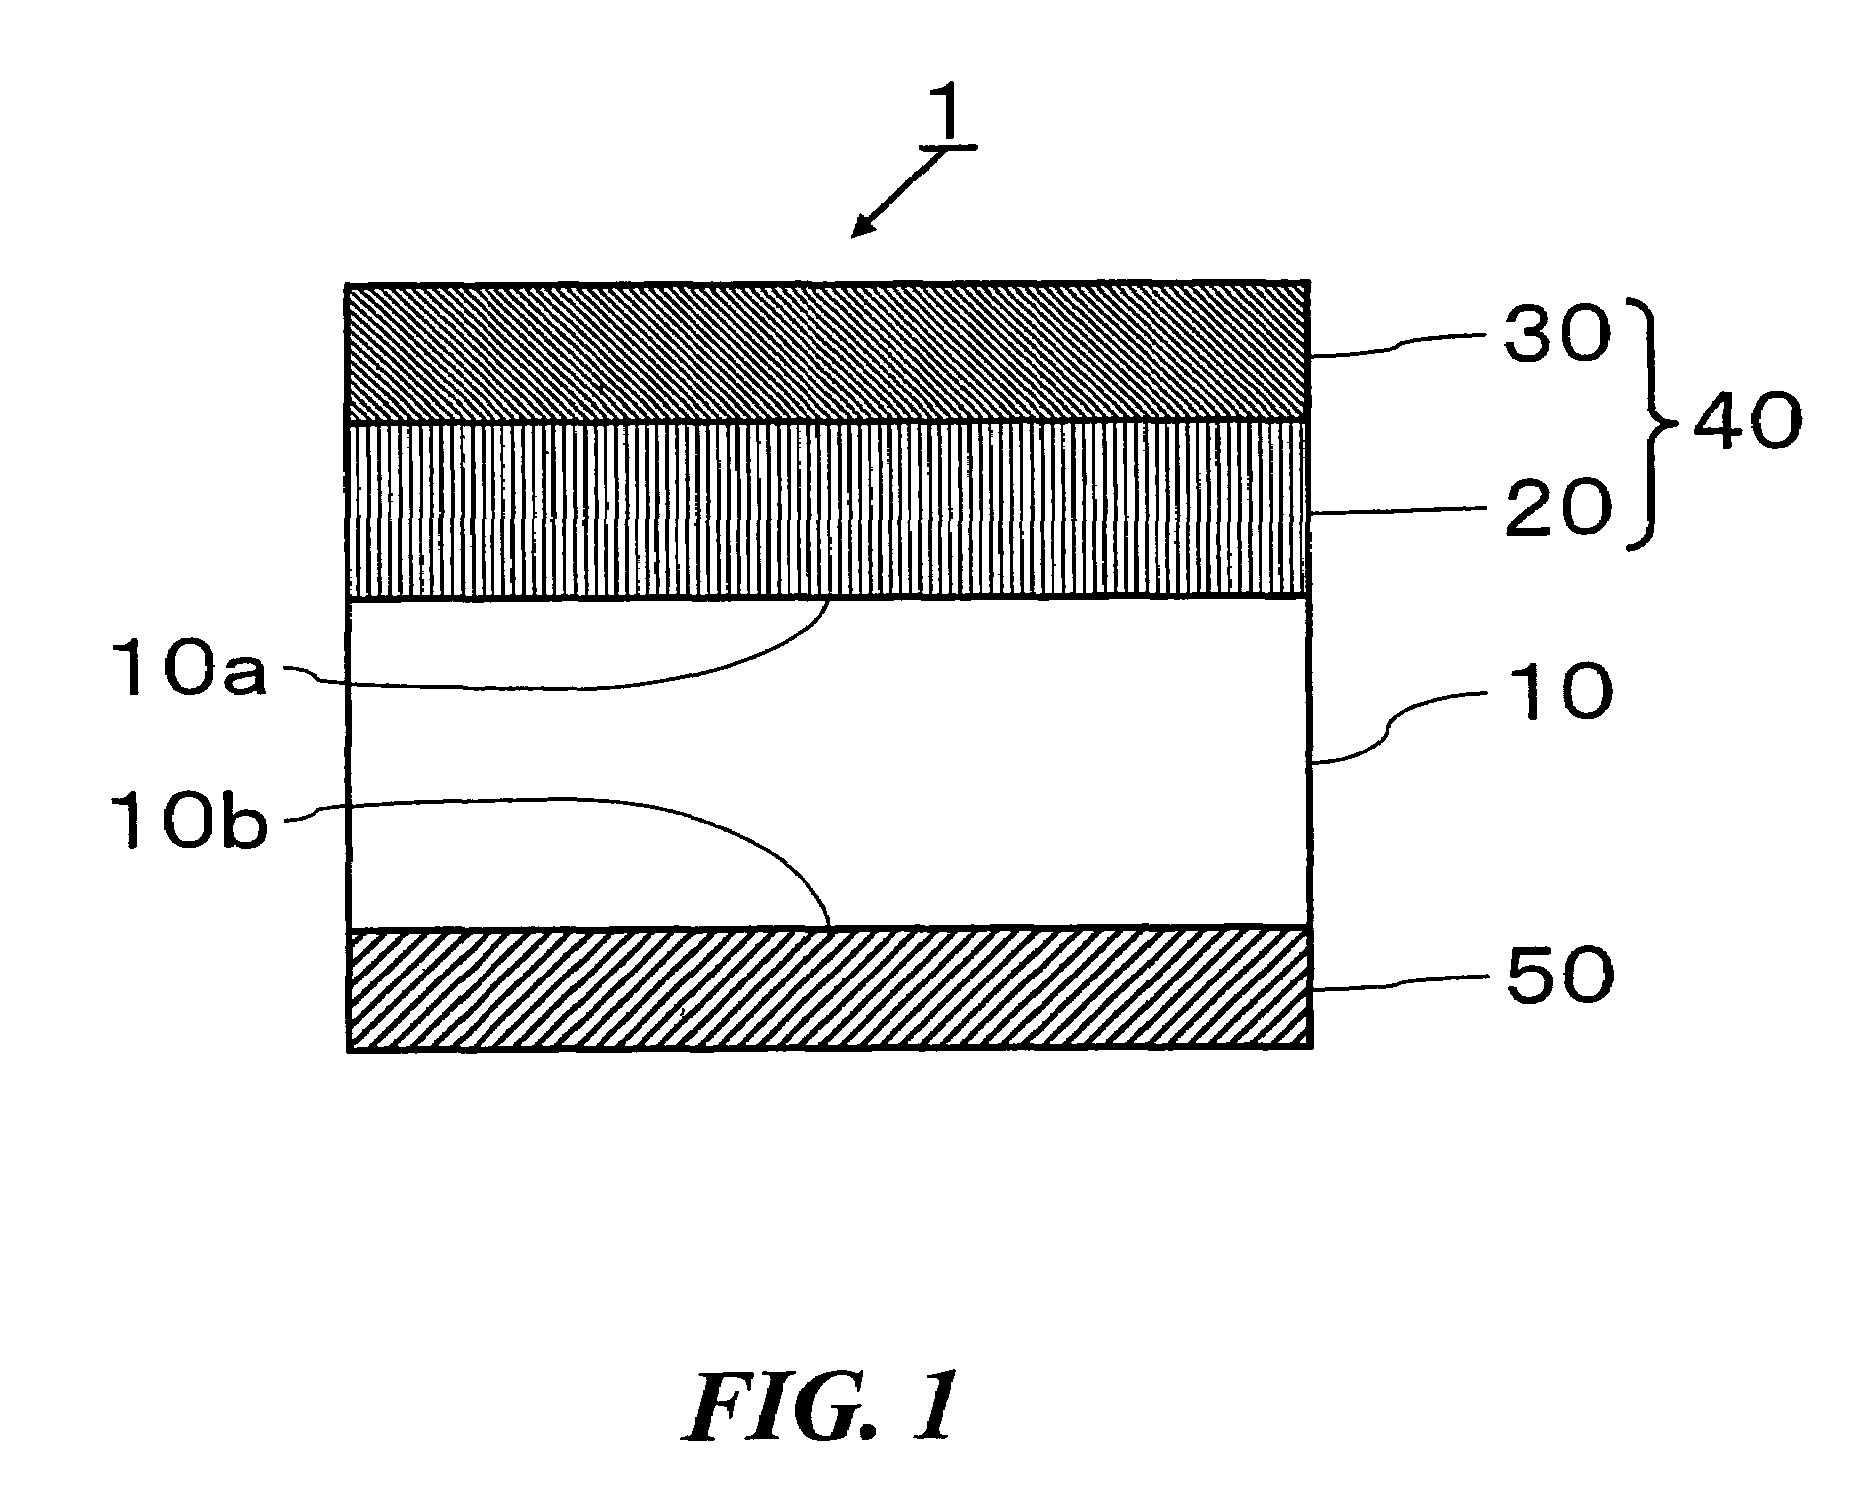 Reflective-type mask blank for EUV lithography